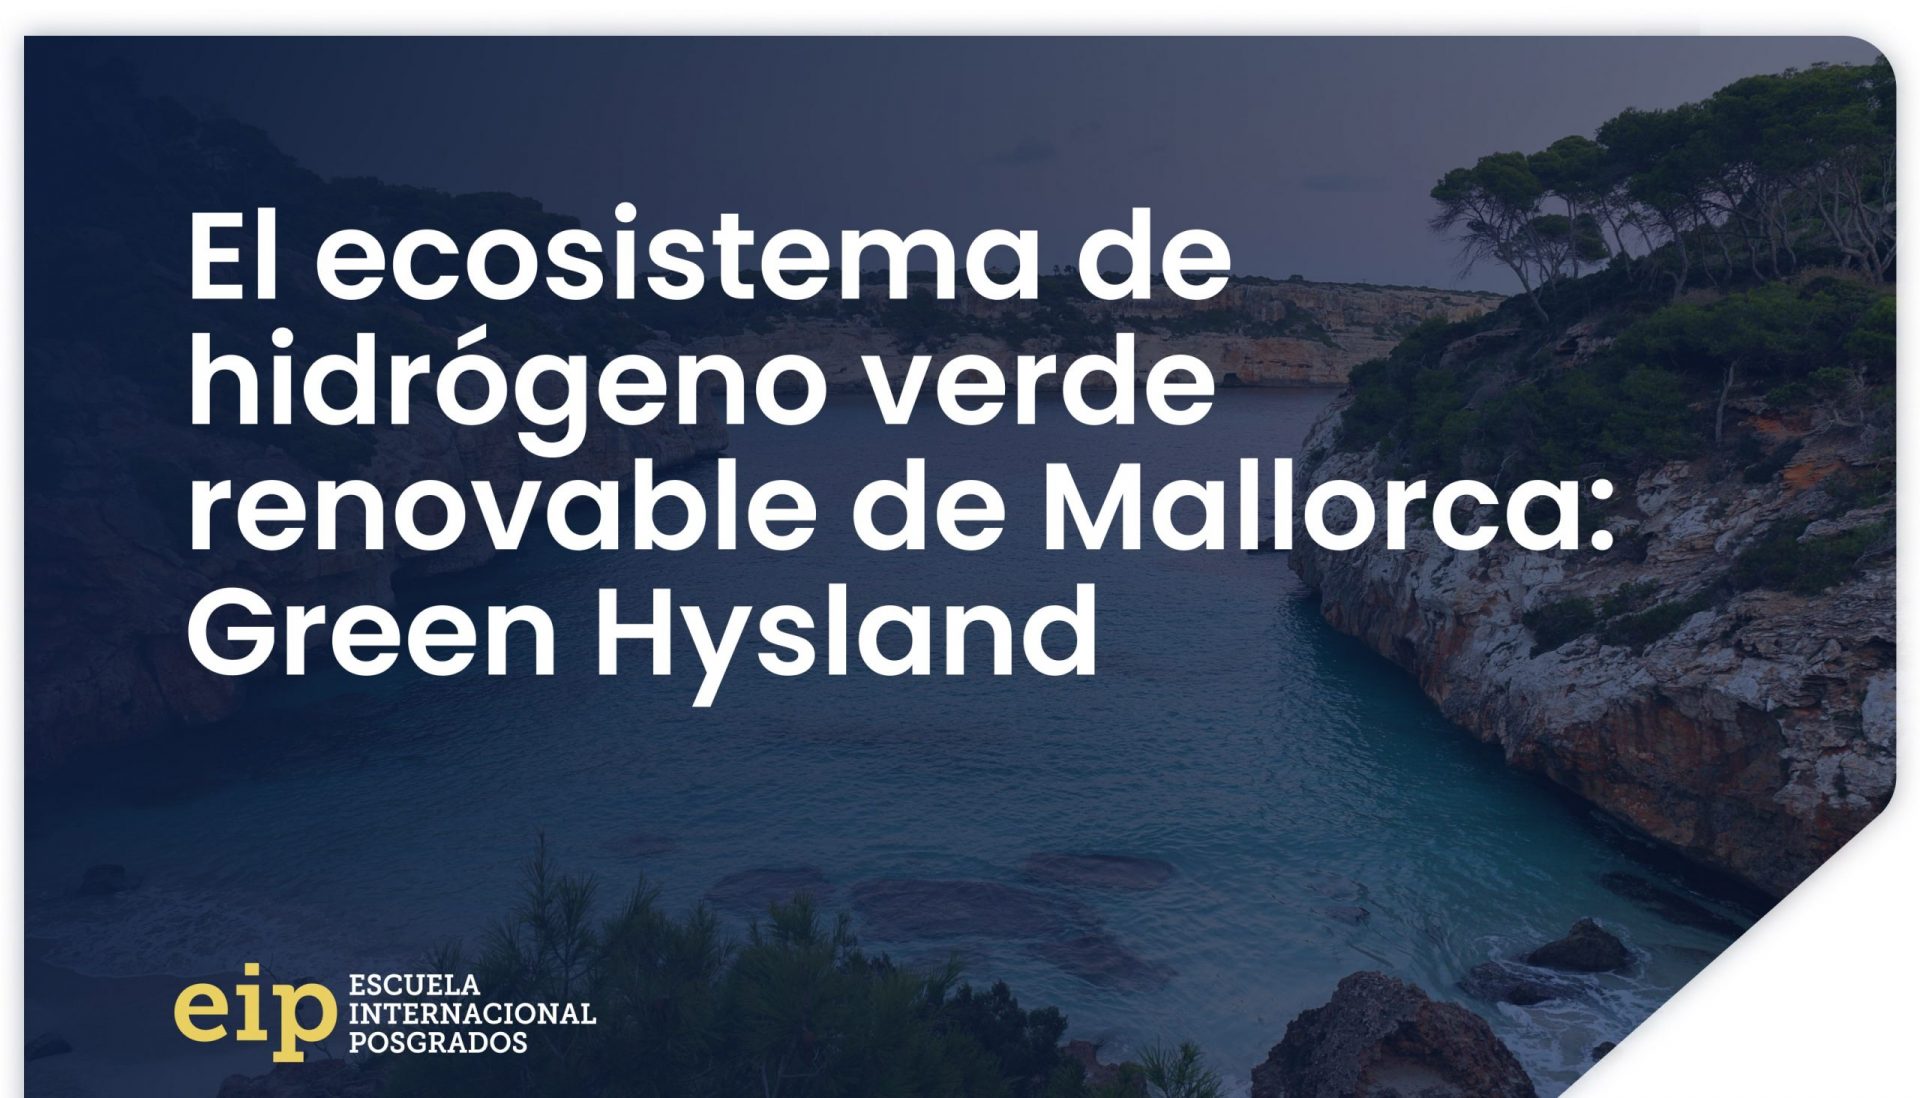 Green Hysland green hydrogen project in Mallorca scaled